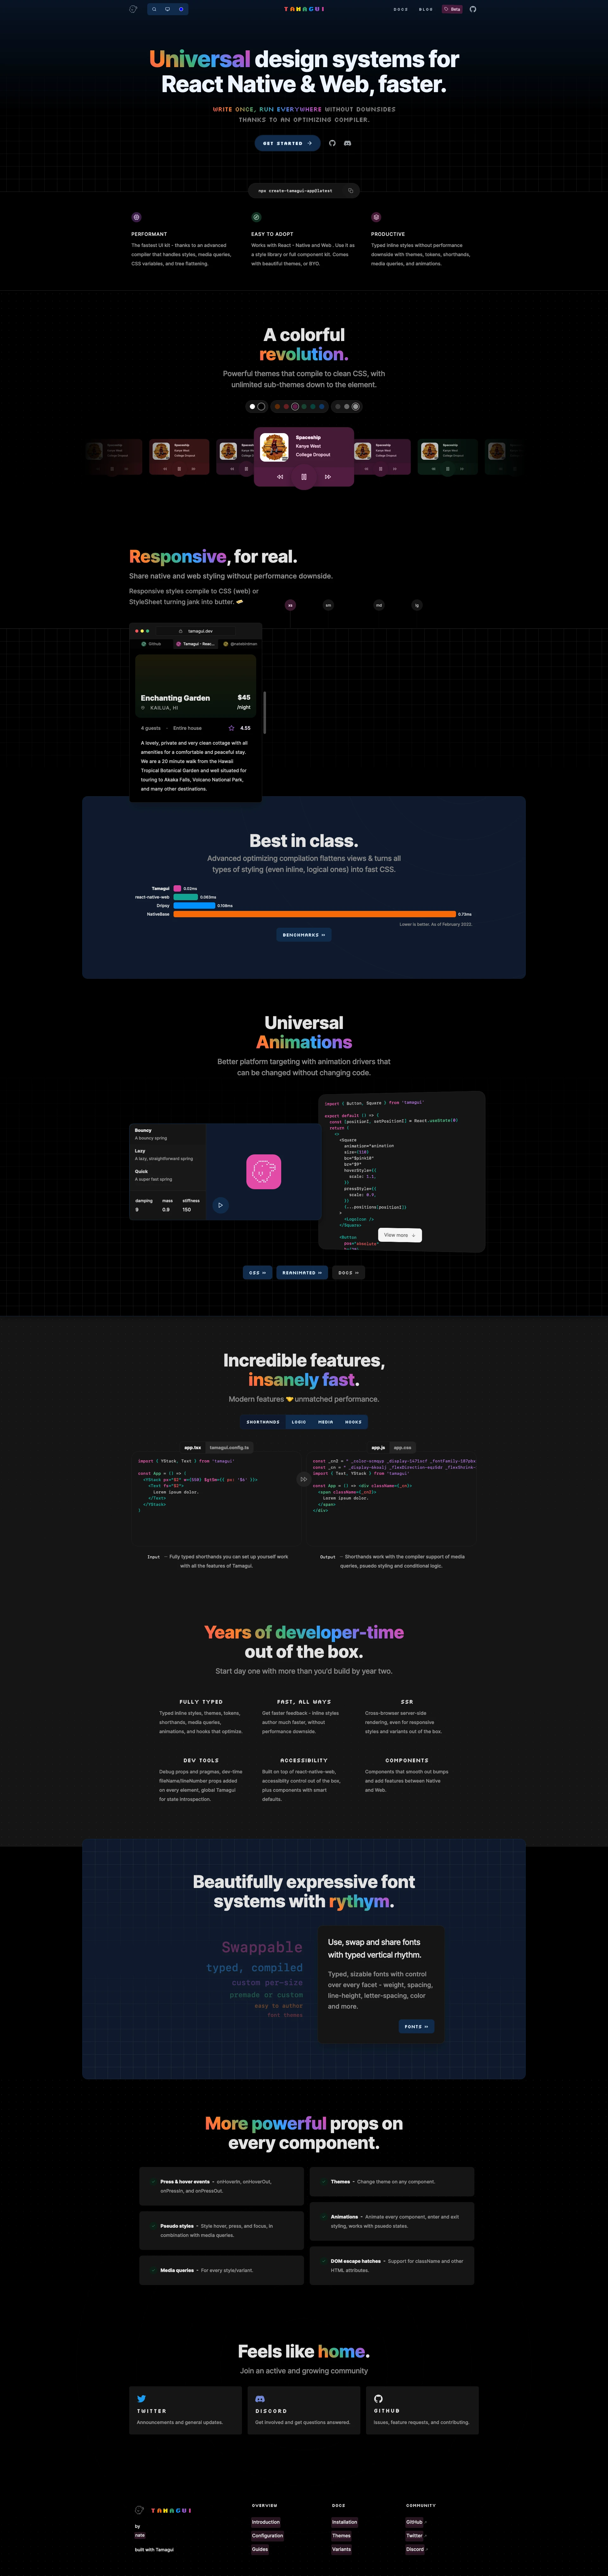 Tamagui Landing Page Example: Universal design systems for React Native & Web, faster.